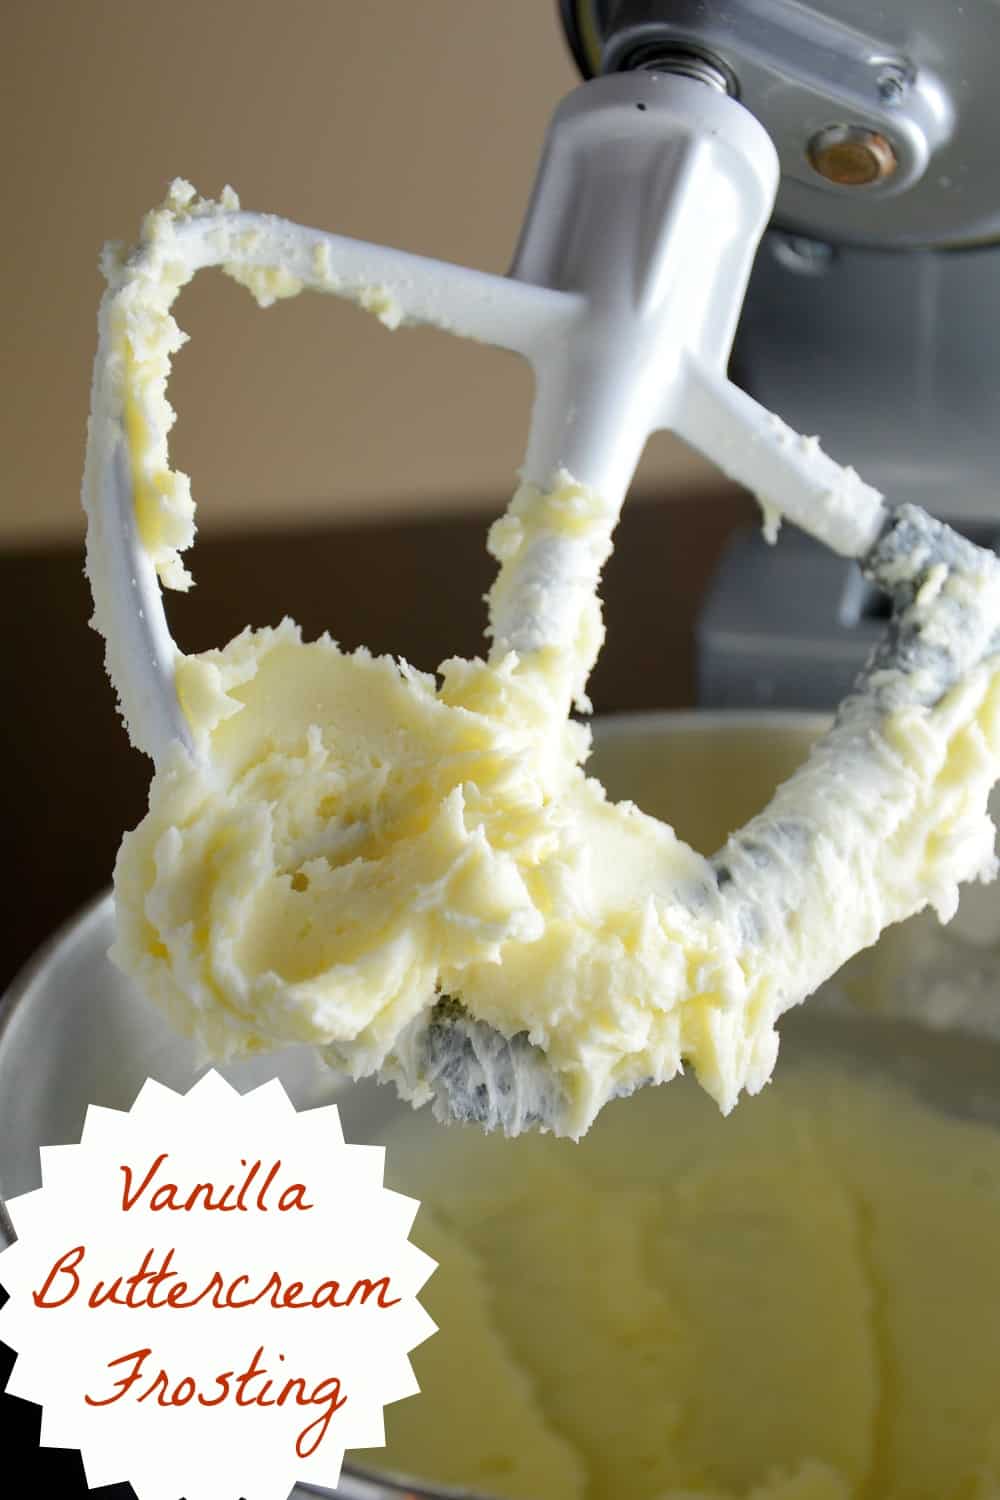 Vanilla Buttercream Frosting - Savory Experiments